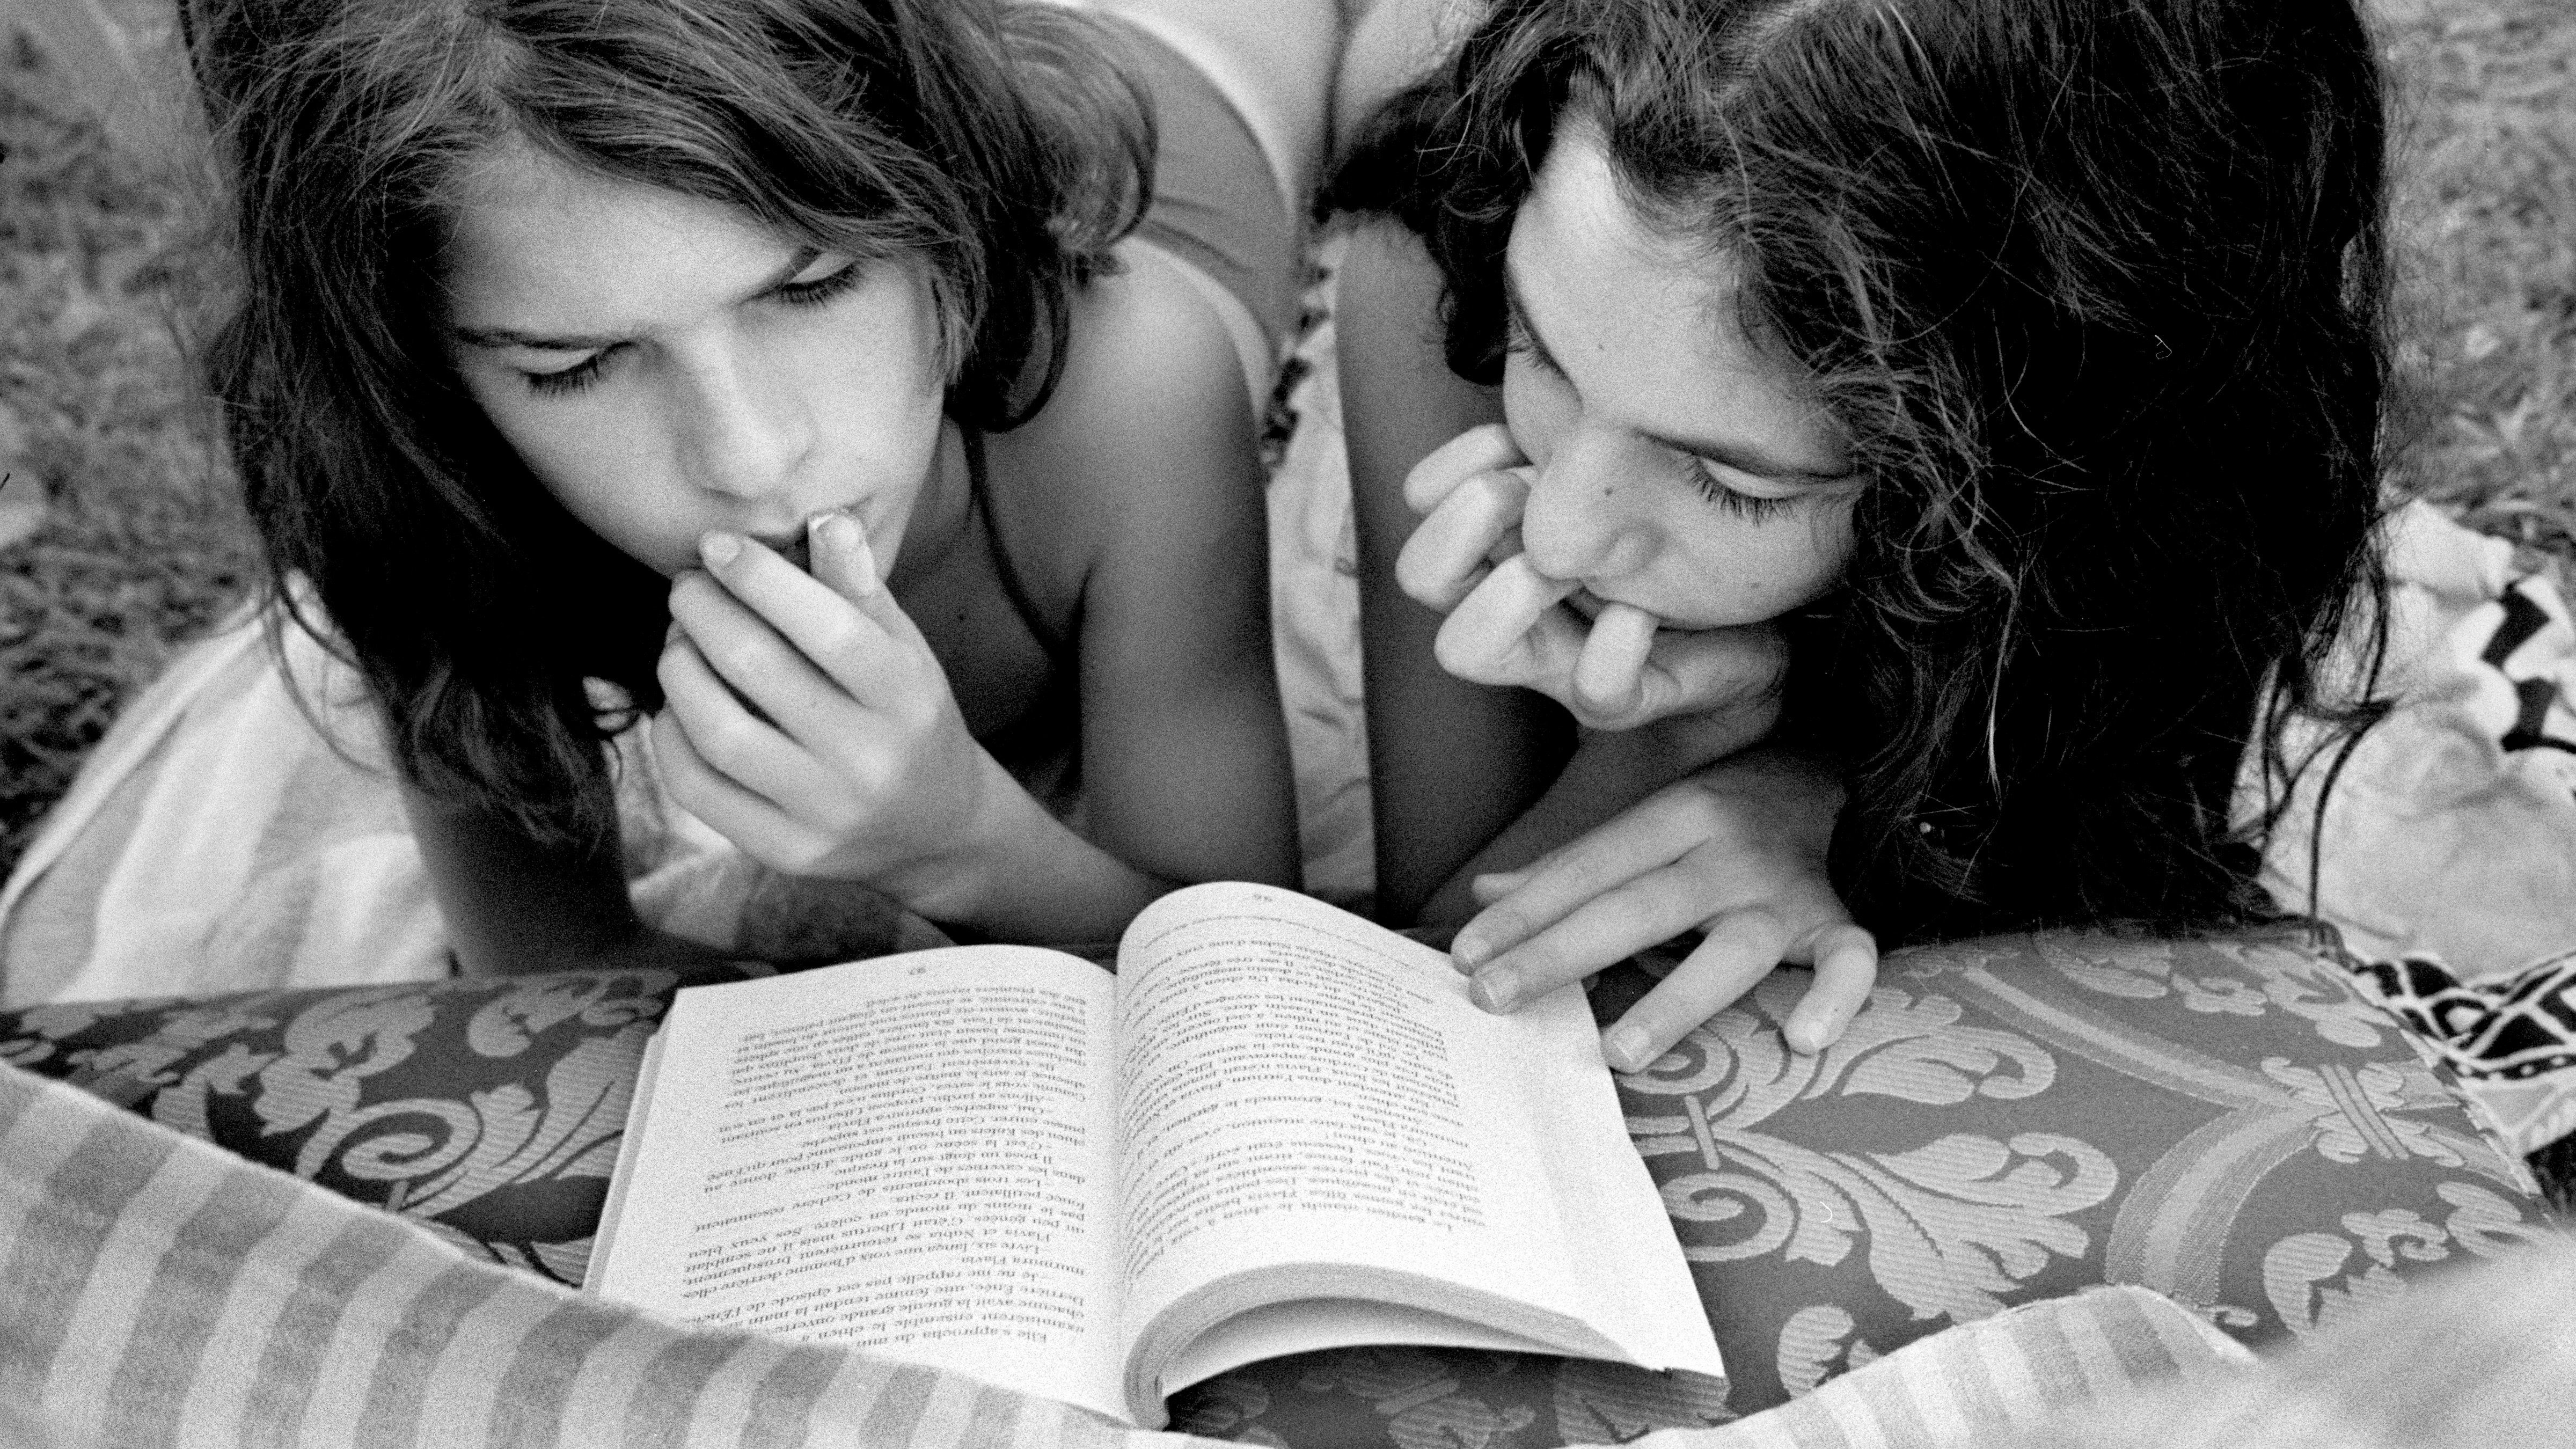 Two girls lay down reading the same book